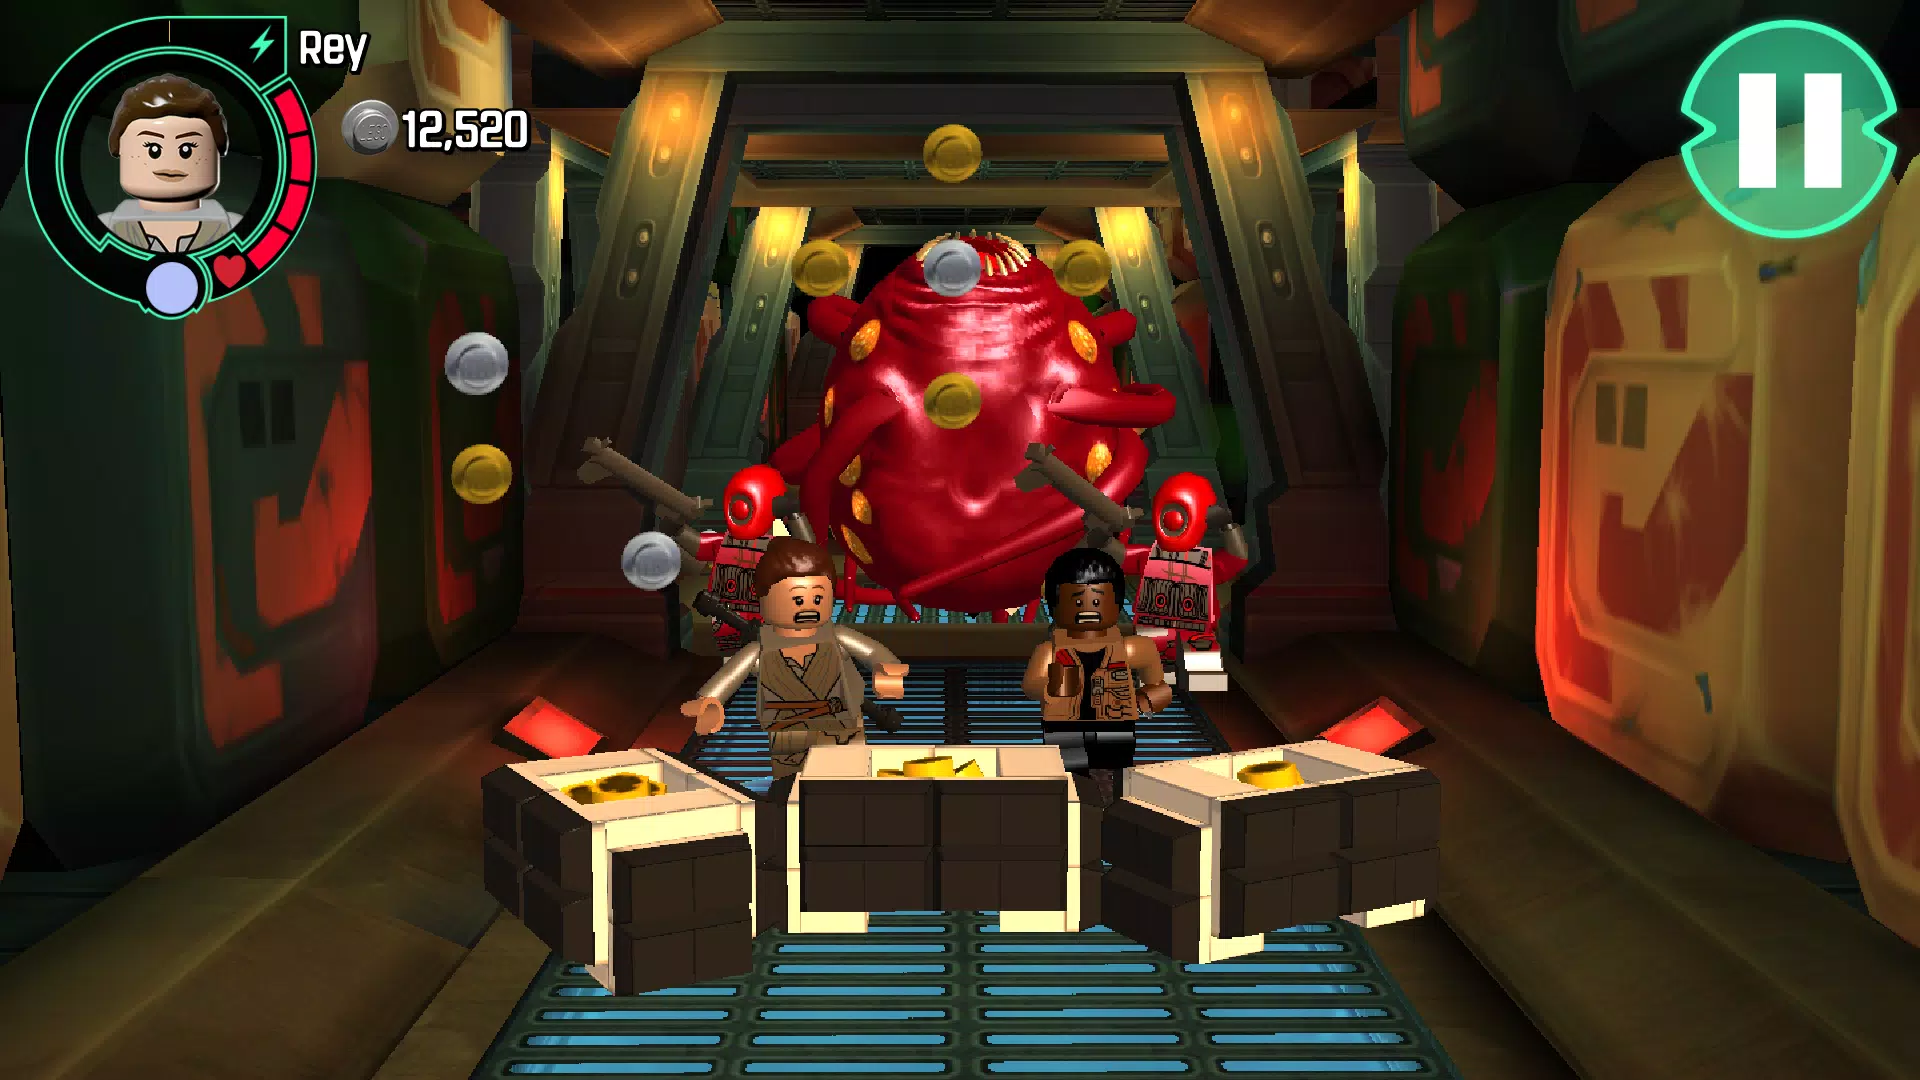 LEGO® Star Wars™ - Download do APK para Android